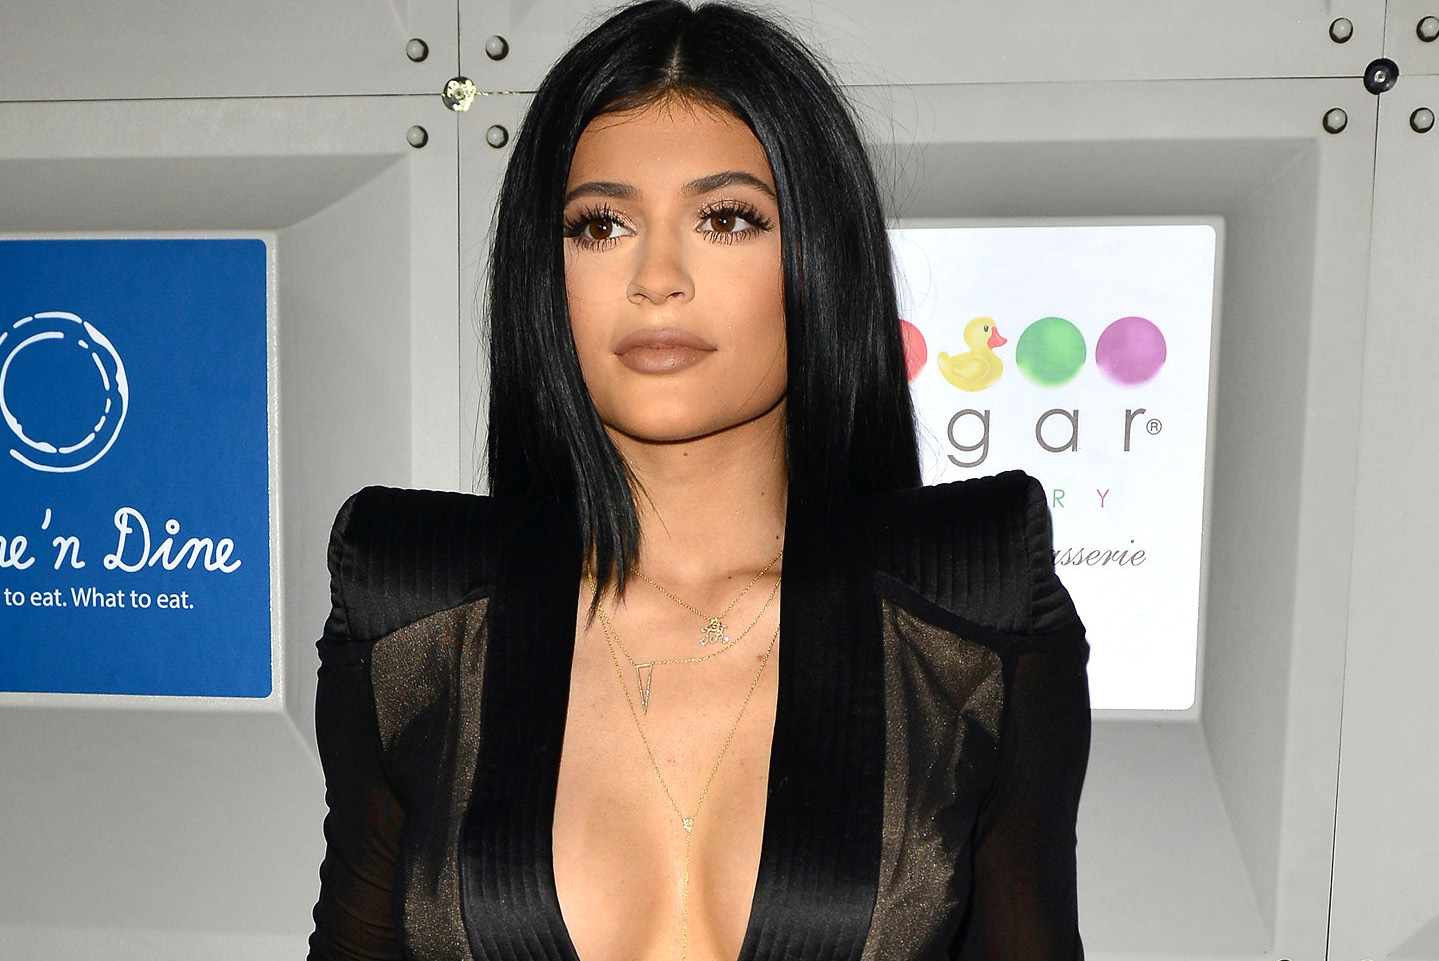 Kylie Jenner Avoids Wardrobe Malfunction With Lots of Duct Tape.